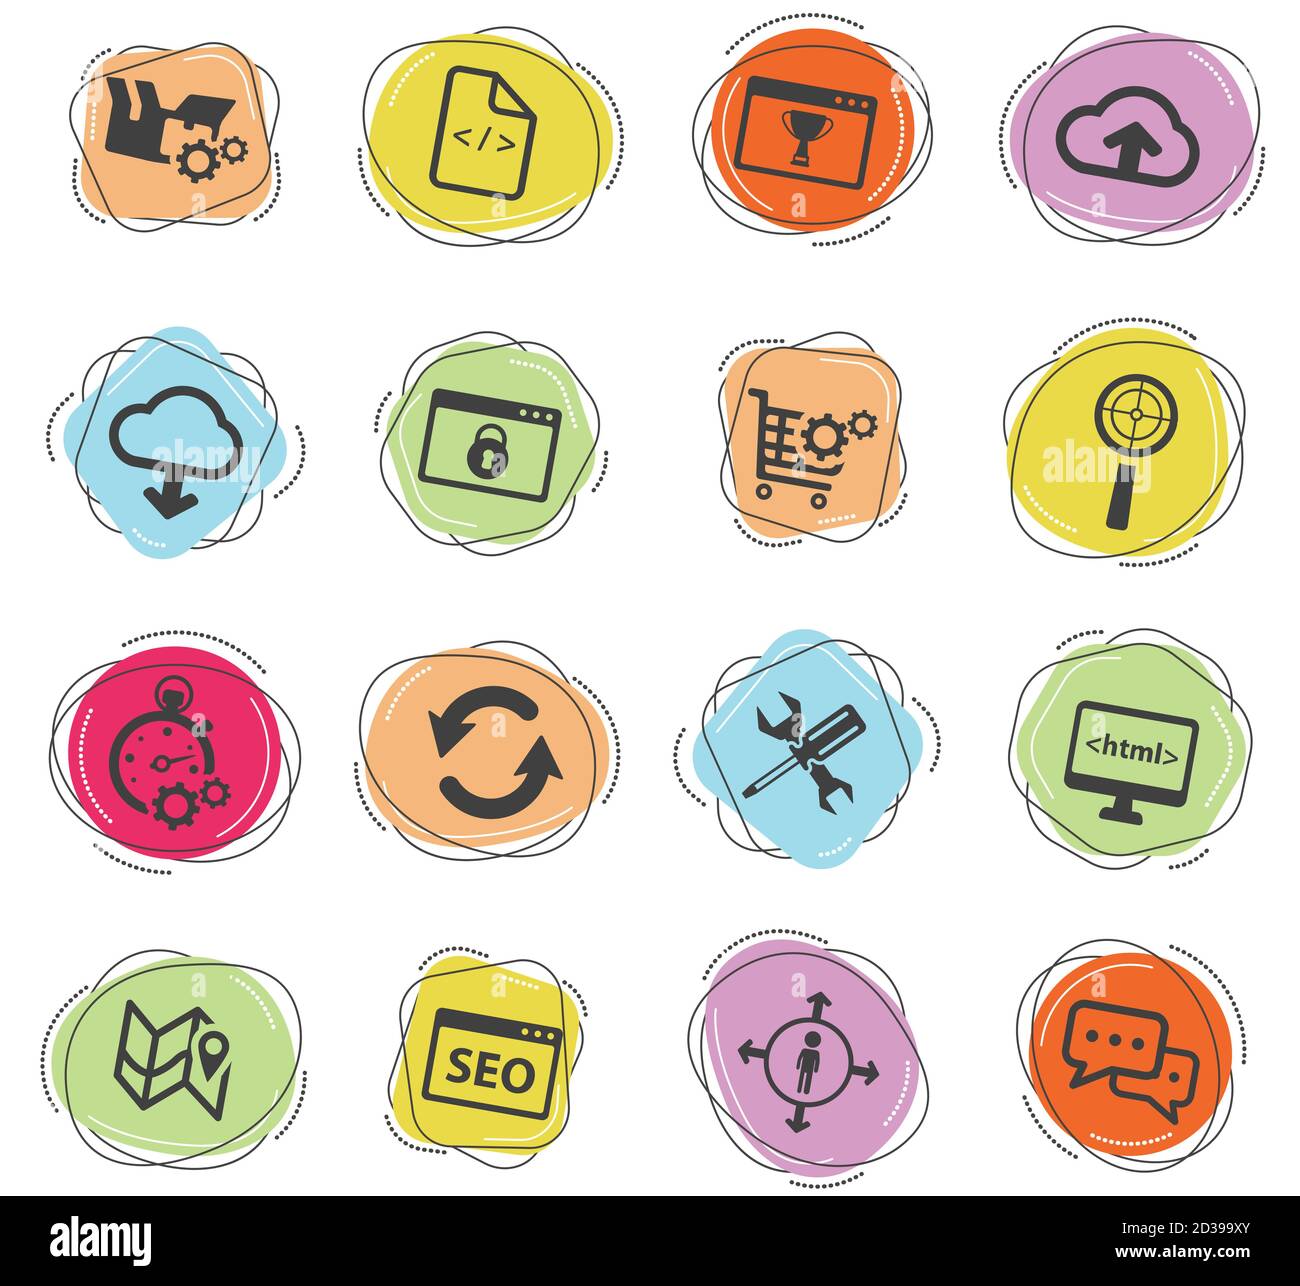 SEO and development simply icons Stock Vector